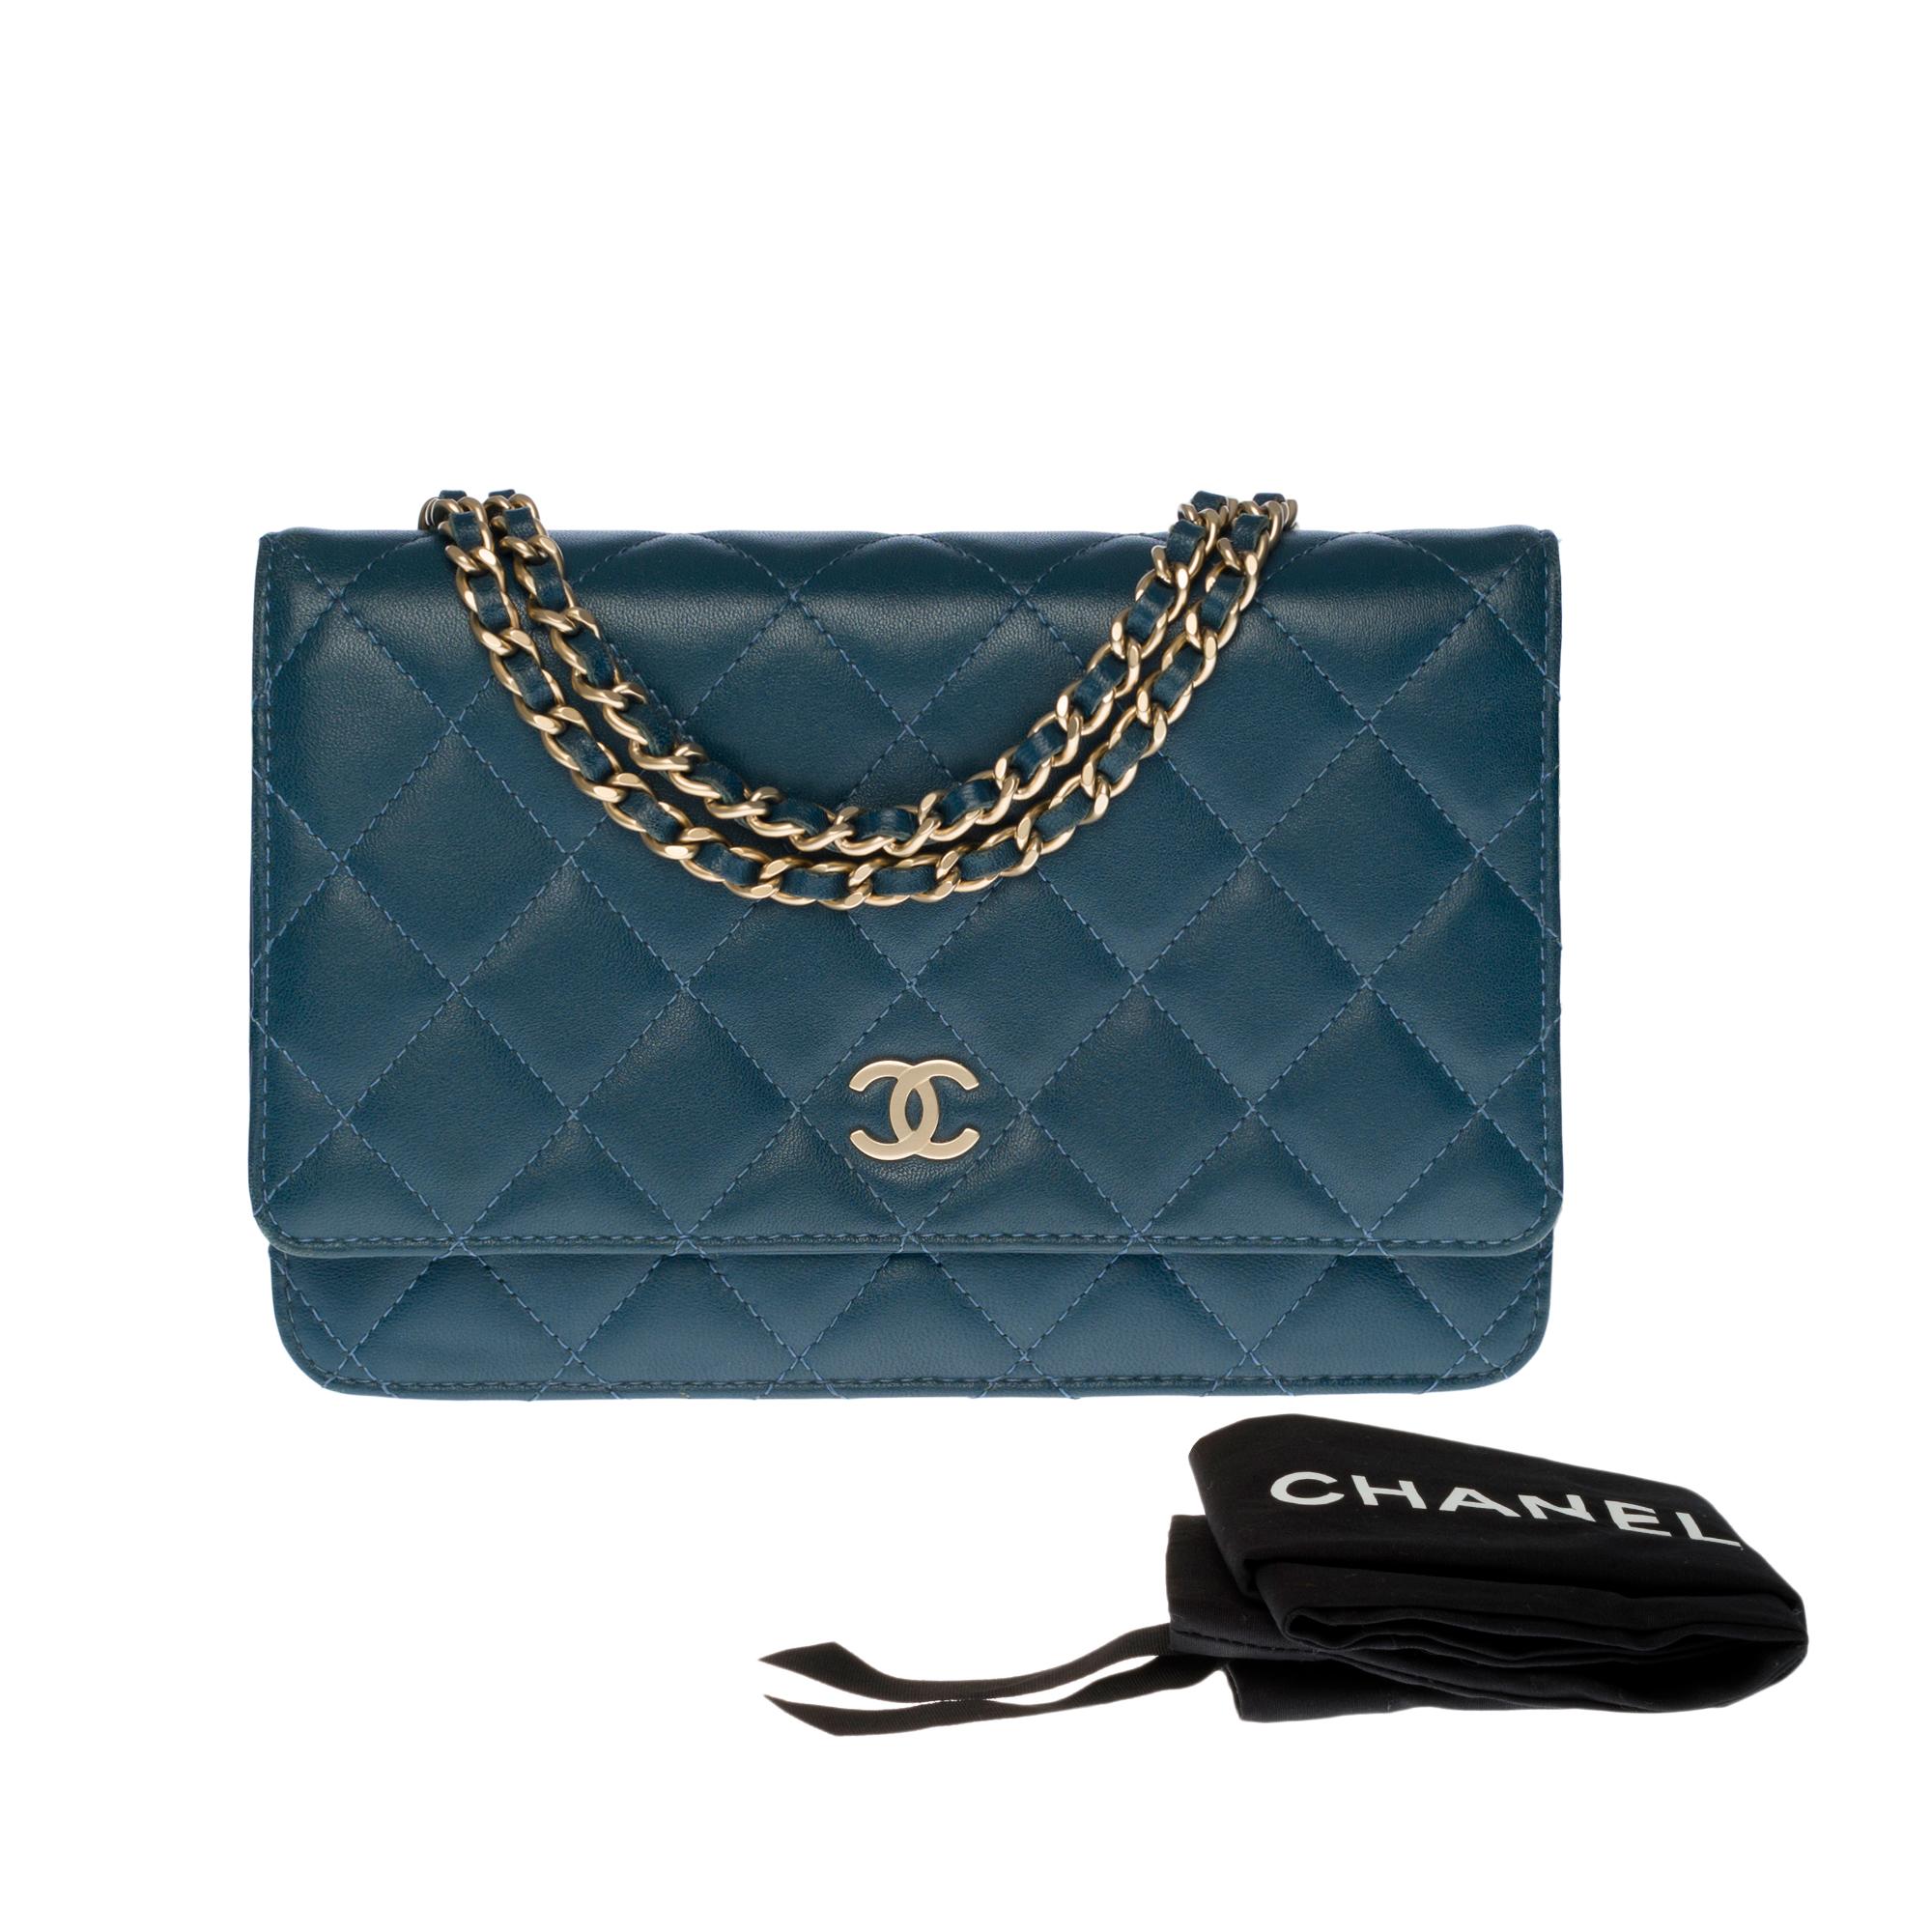 Amazing Chanel Wallet on Chain (WOC) shoulder bag in blue quilted leather, GHW 5